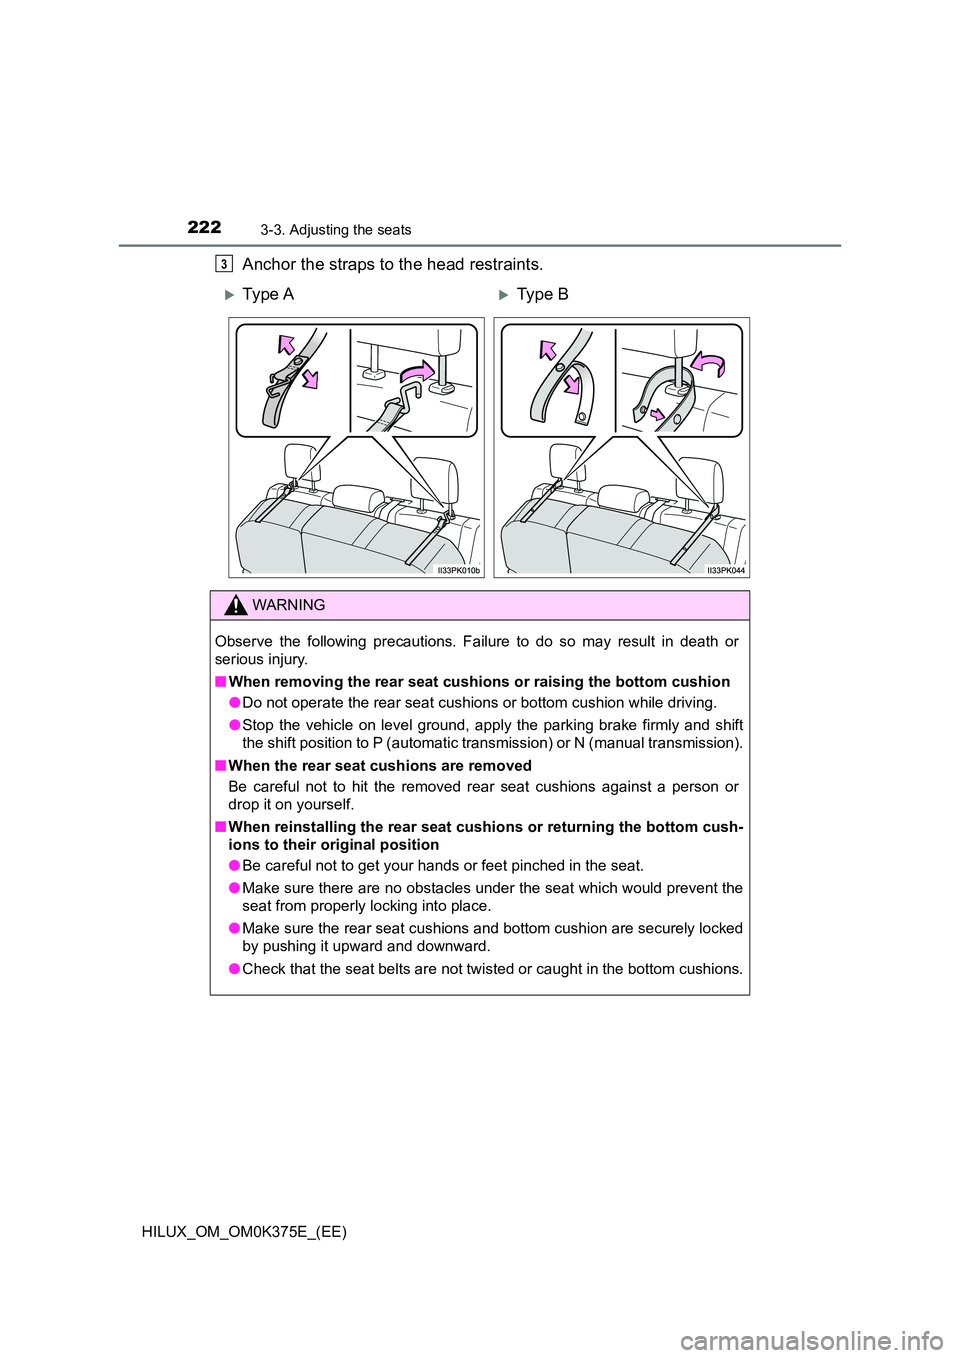 TOYOTA HILUX 2018  Owners Manual 2223-3. Adjusting the seats
HILUX_OM_OM0K375E_(EE)
Anchor the straps to the head restraints.3
Ty pe  AType B
WARNING
Observe the following precautions. Failure to do so may result in death or 
s